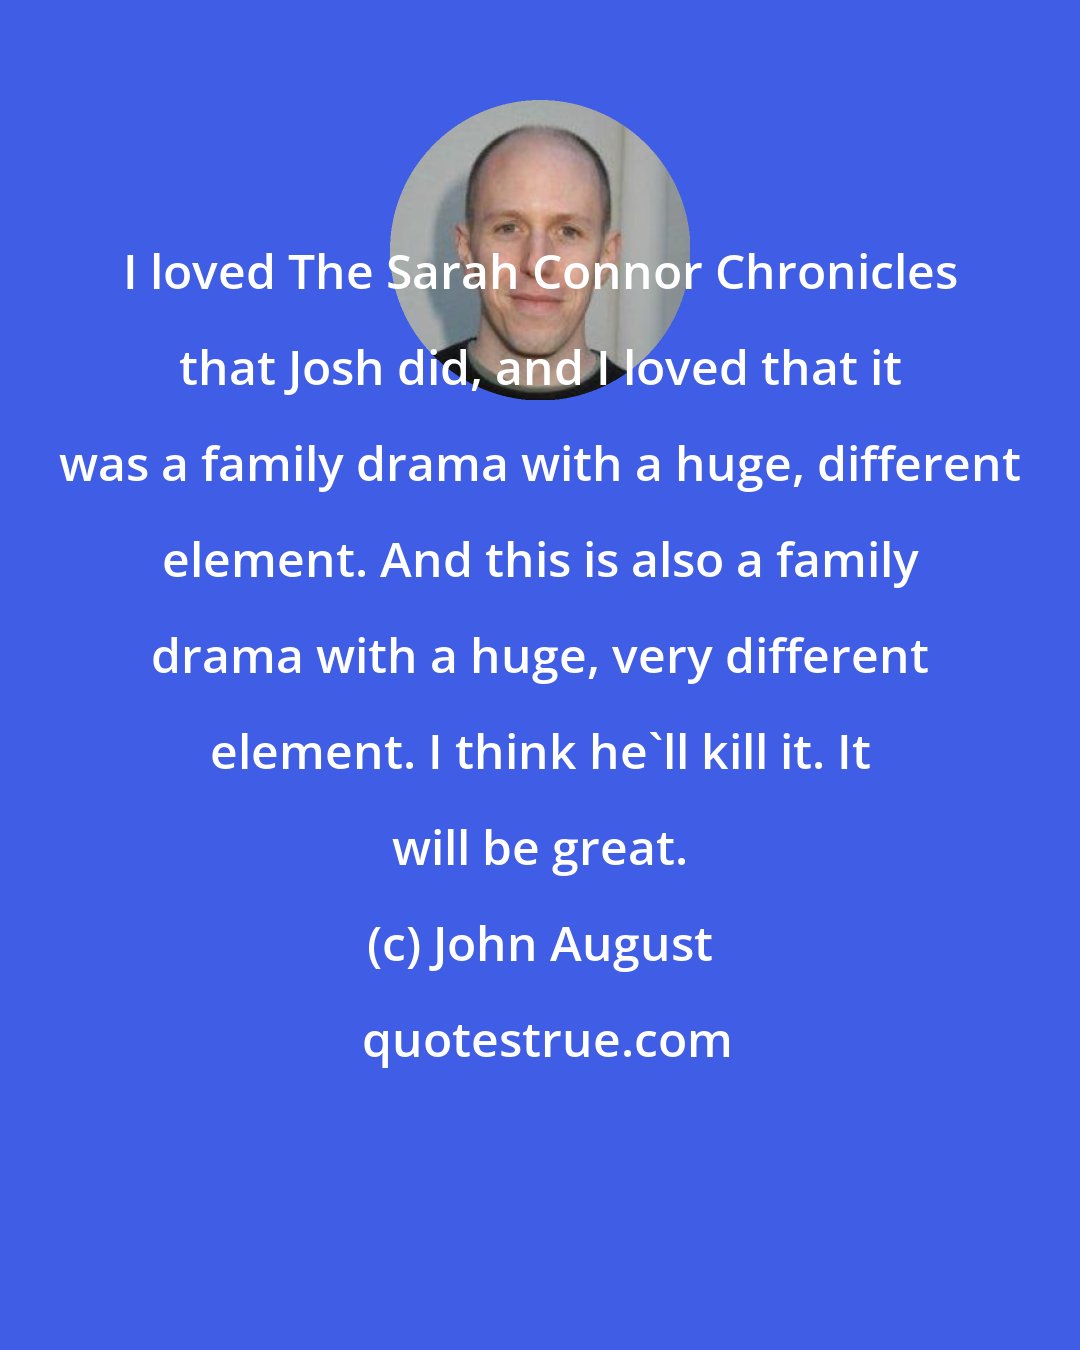 John August: I loved The Sarah Connor Chronicles that Josh did, and I loved that it was a family drama with a huge, different element. And this is also a family drama with a huge, very different element. I think he'll kill it. It will be great.